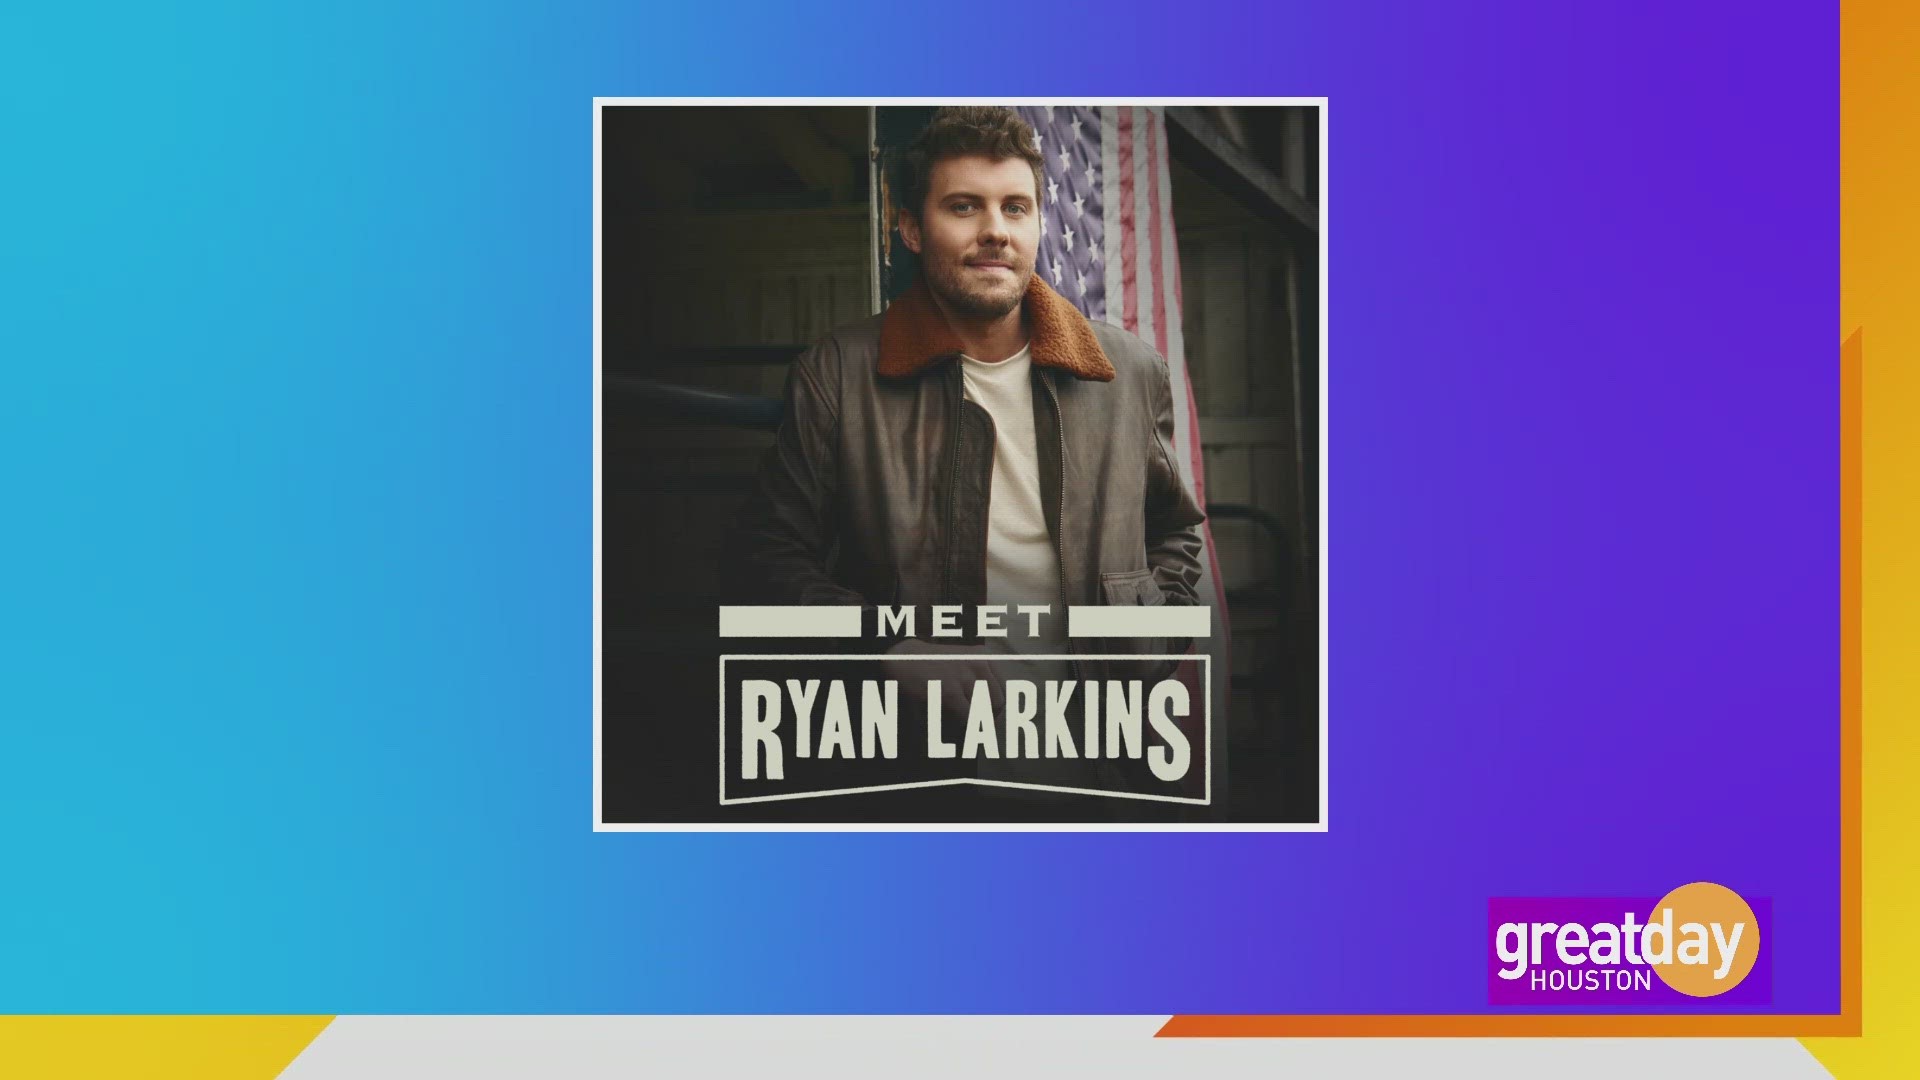 Country singer, Ryan Larkins, steps into the spotlight with his debut album.